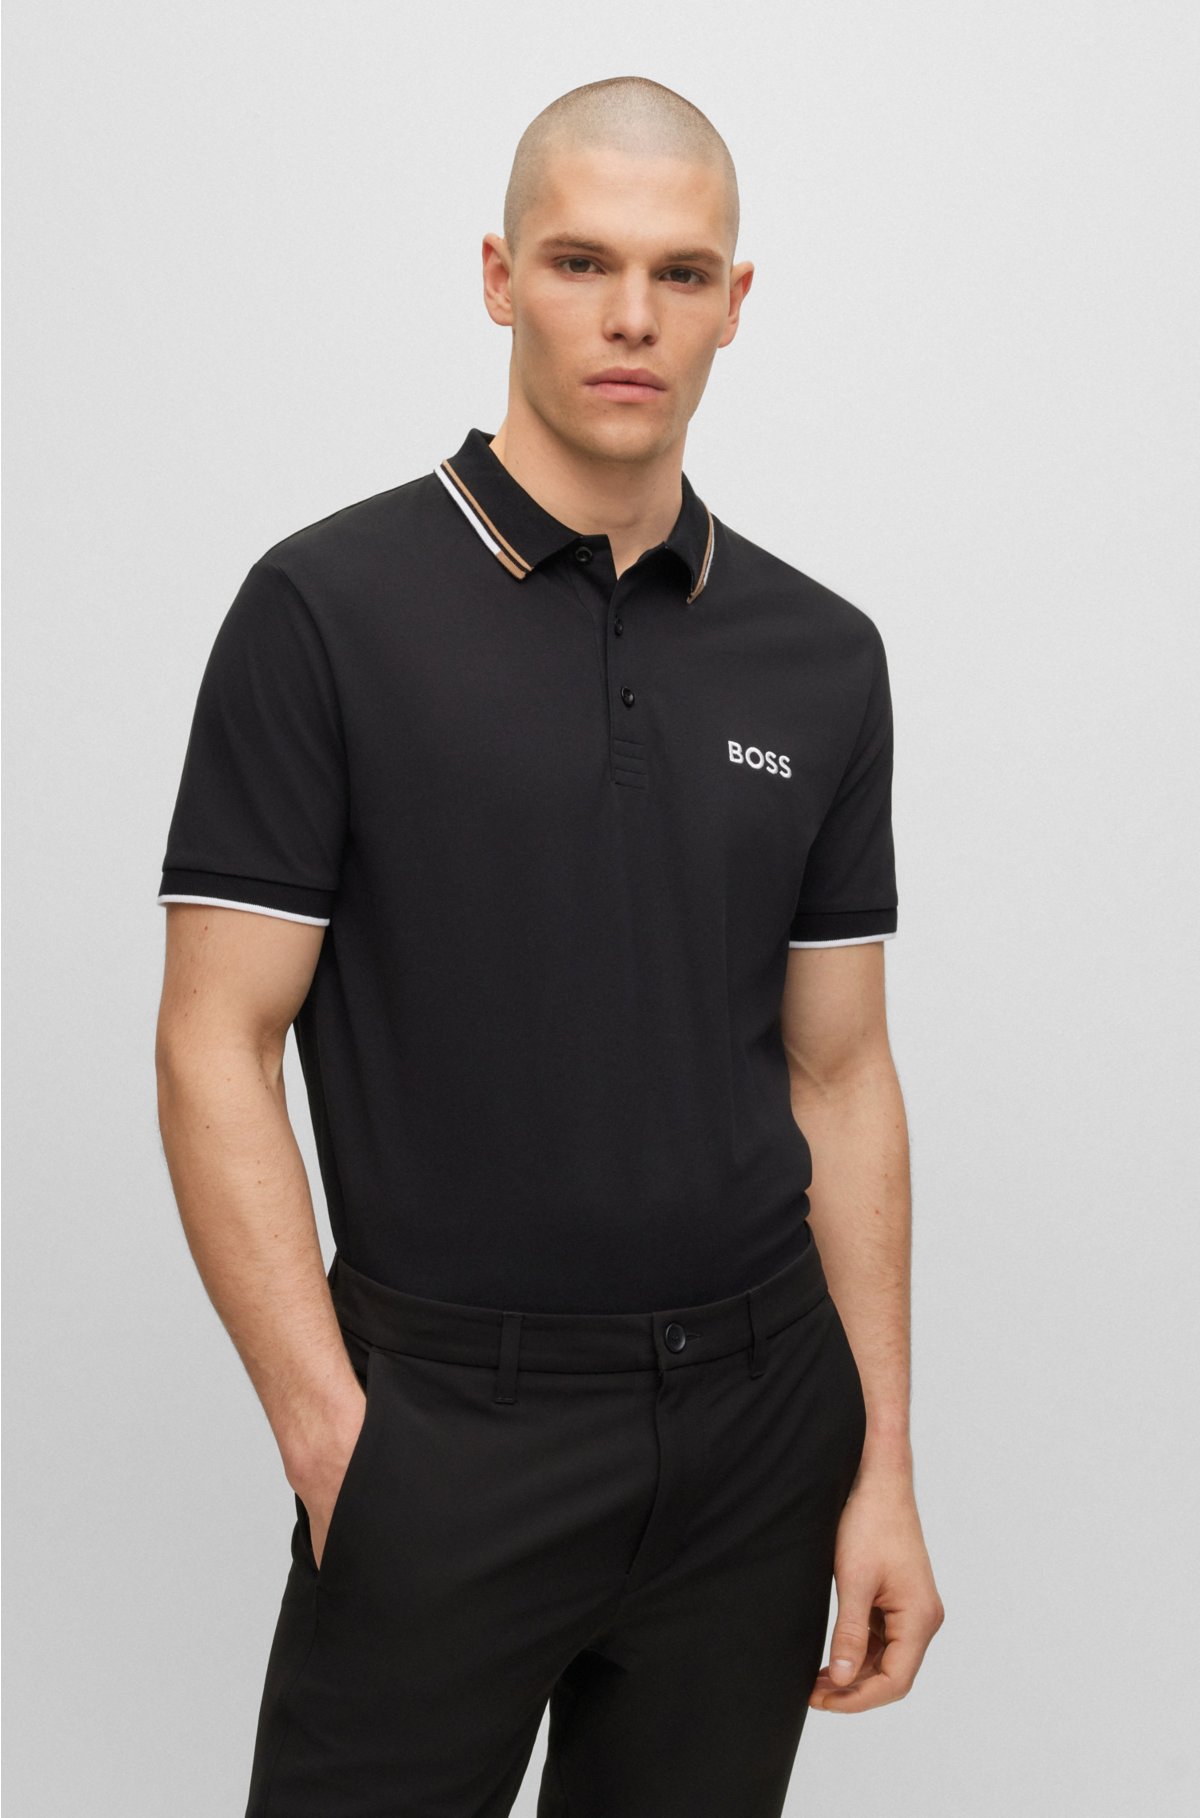 BOSS - contrast with details polo Cotton-blend shirt